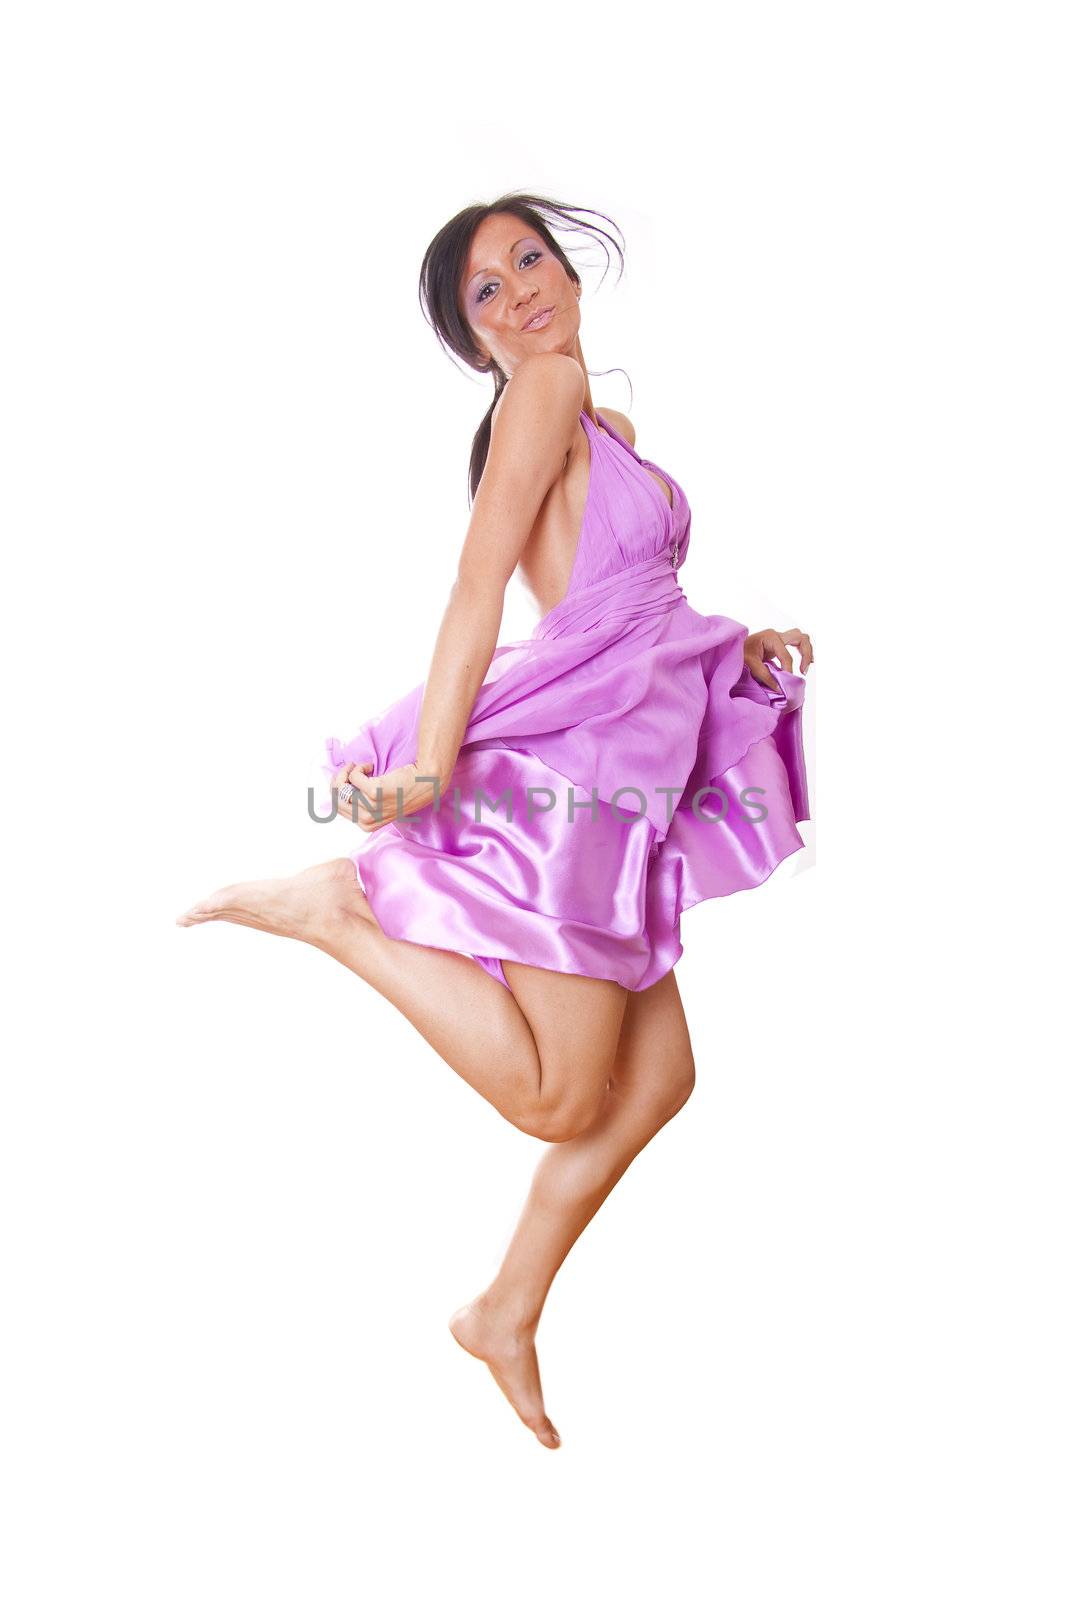 Woman In Violet Silk Dress Jumping, isolated on white